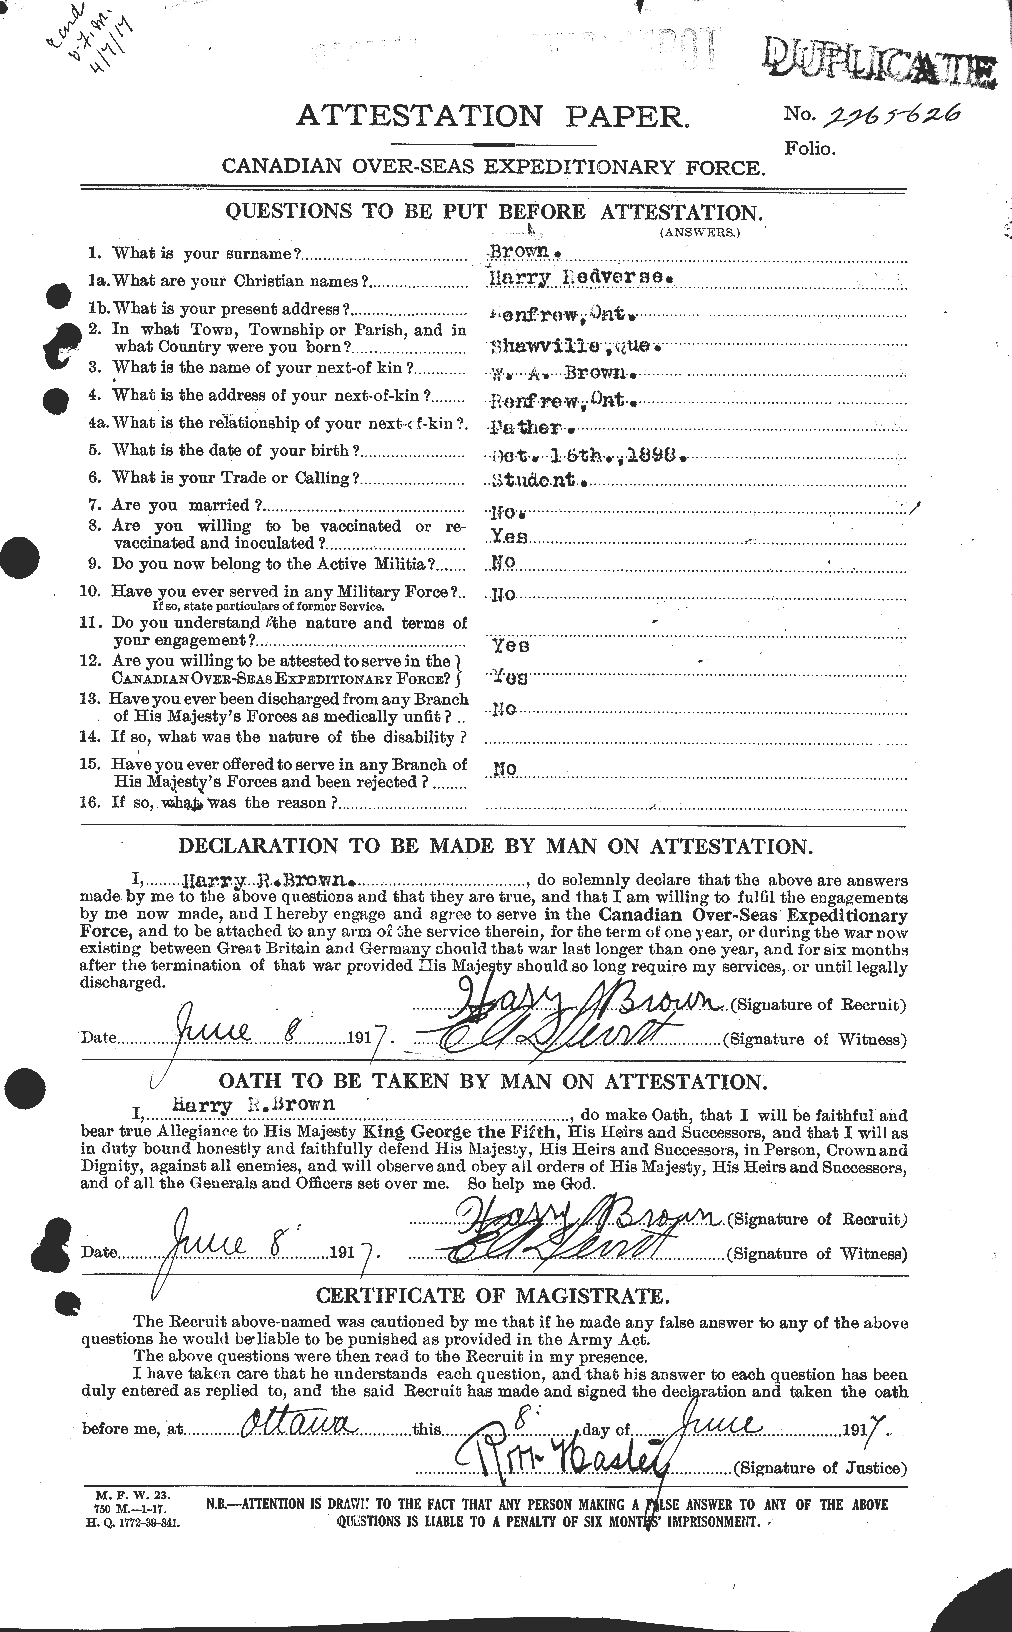 Personnel Records of the First World War - CEF 265466a